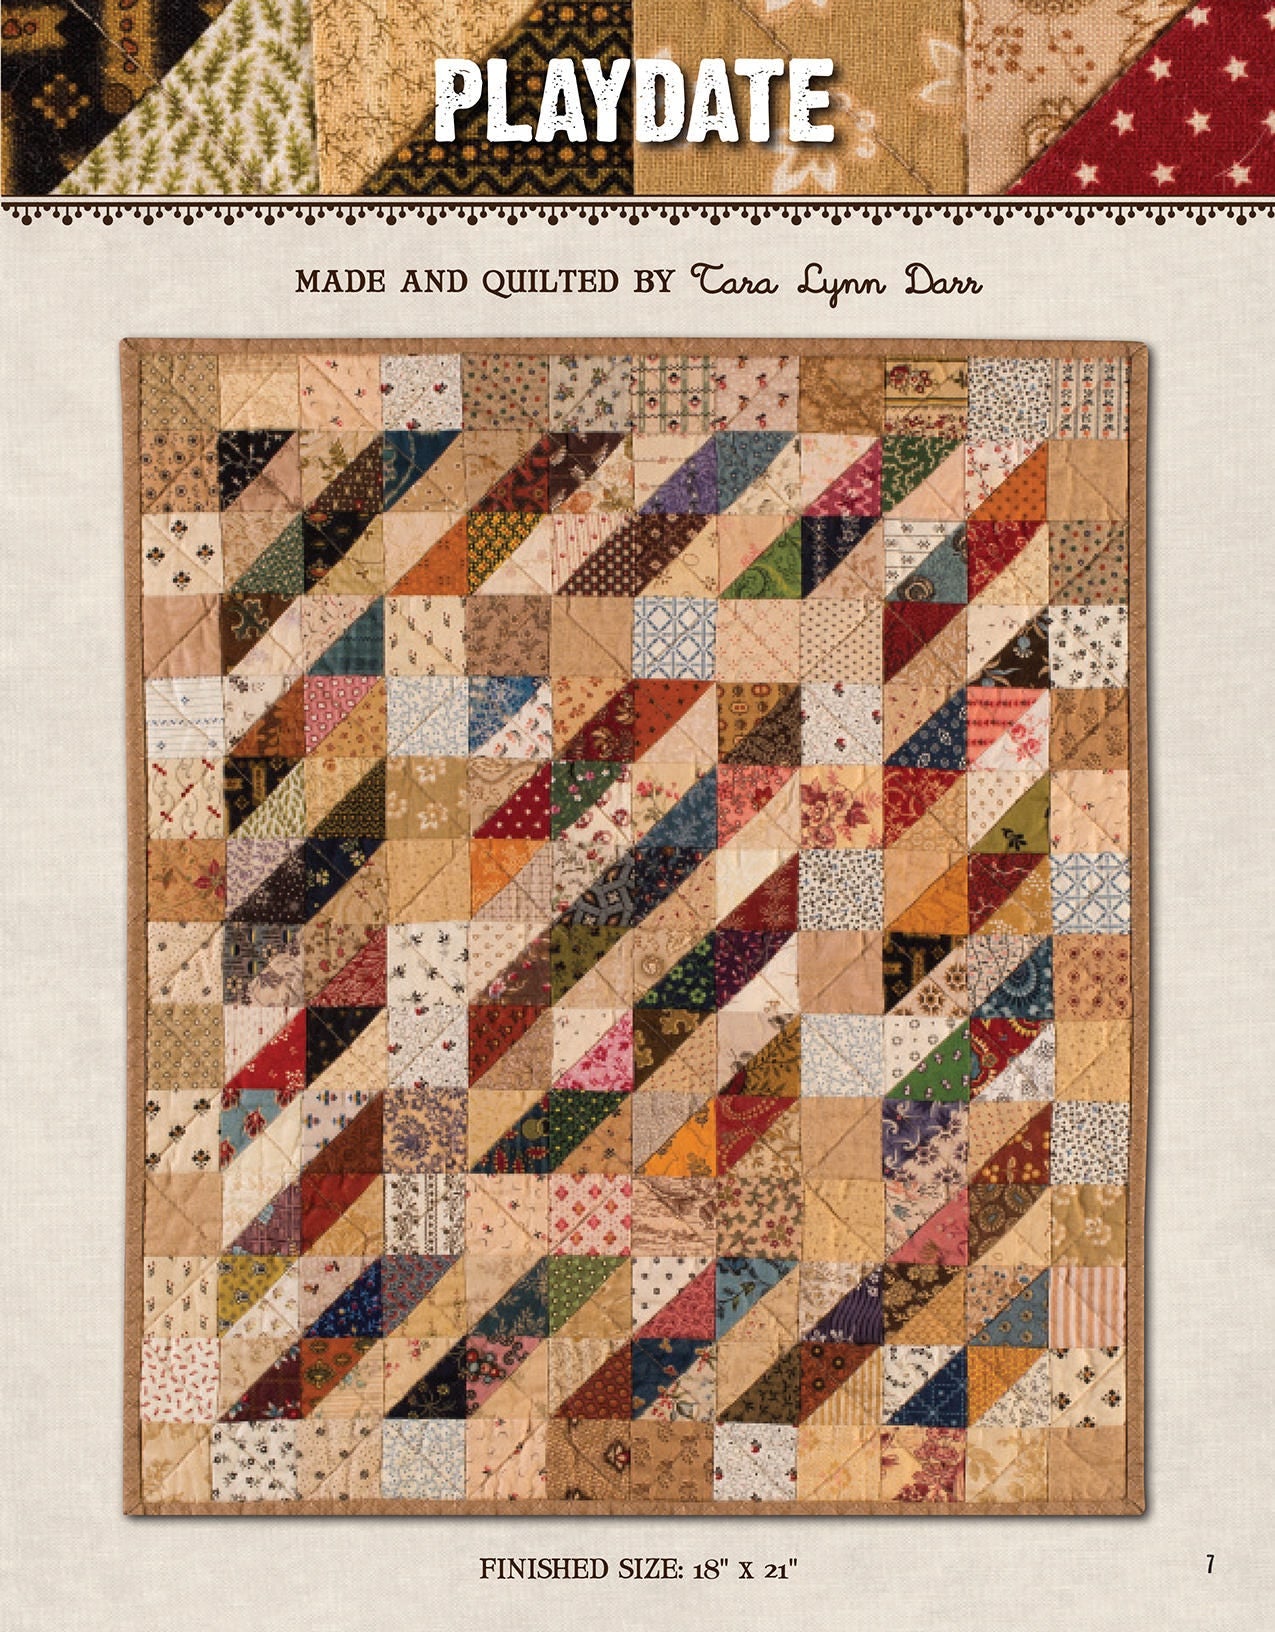 Small Treasures From Scraps Quilt Pattern Book by Tara Lynn Darr for Kansas City Star Quilts